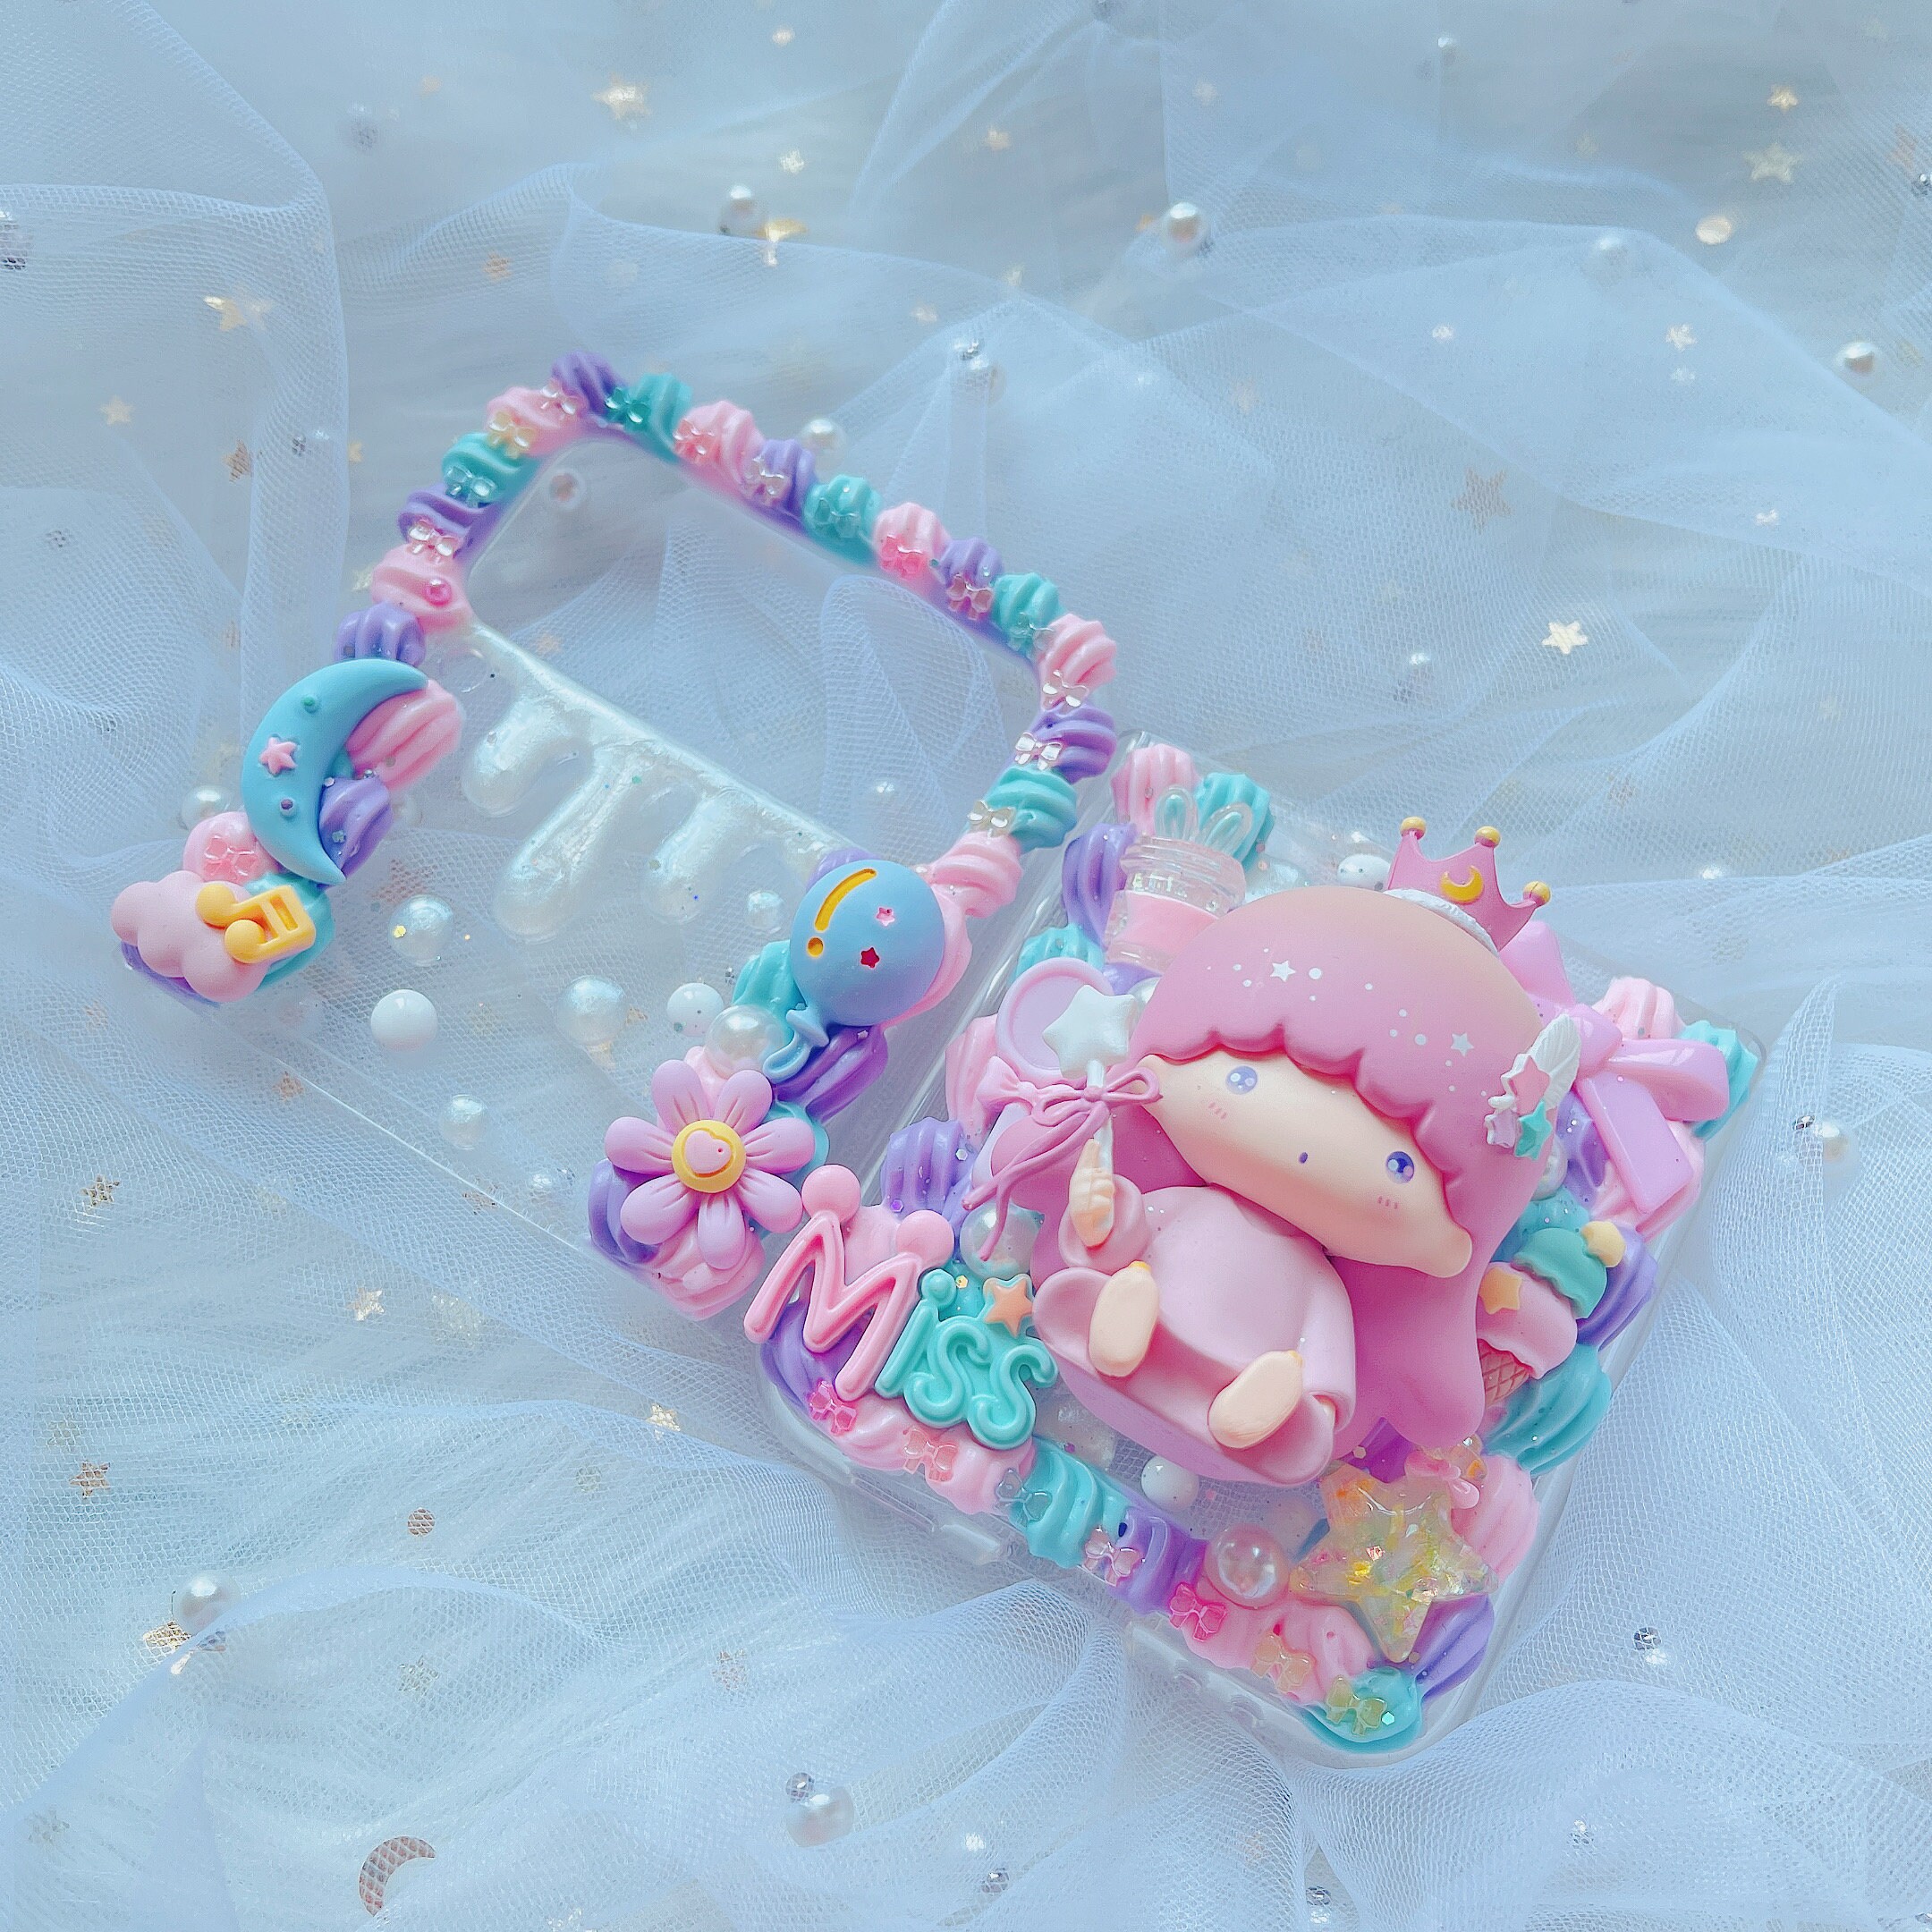 Z Flip 5 2023 Phone Case,decoden Phone Case, Custom Phone Case,  Personalized Phone Case,whipped Cream Effect Casefor Any Device 